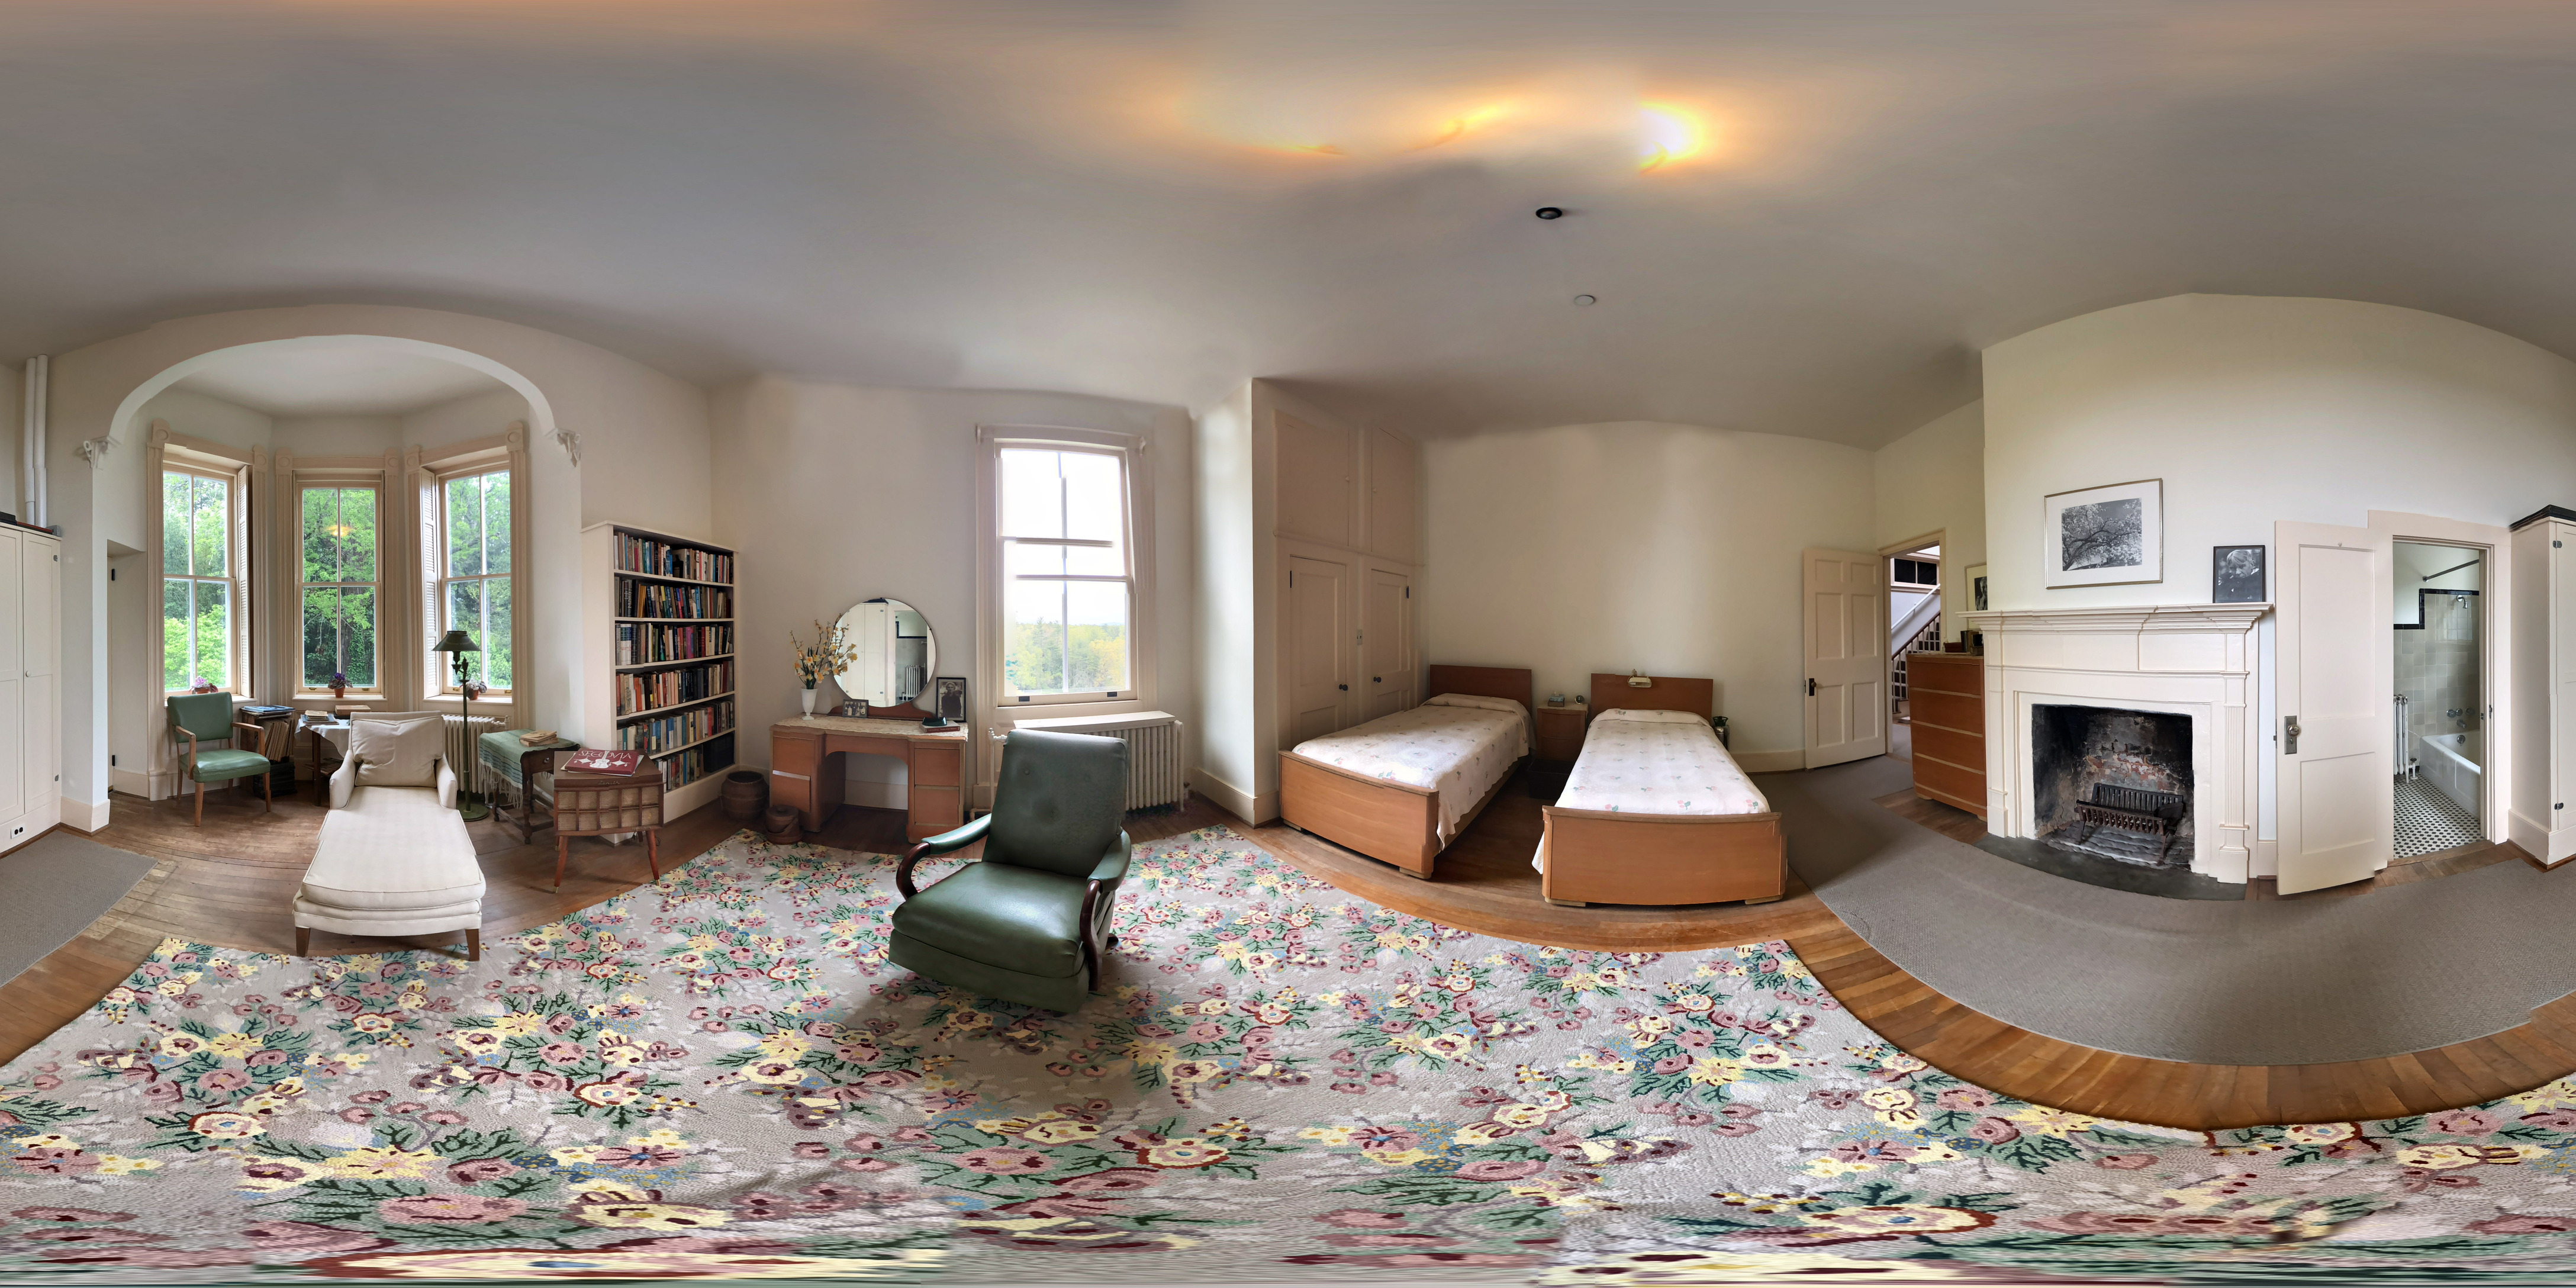 360 image of a bedroom with 2 twin beds, a large bay window, dressers, bookshelf and 2 comfortable lounge chairs in the center.